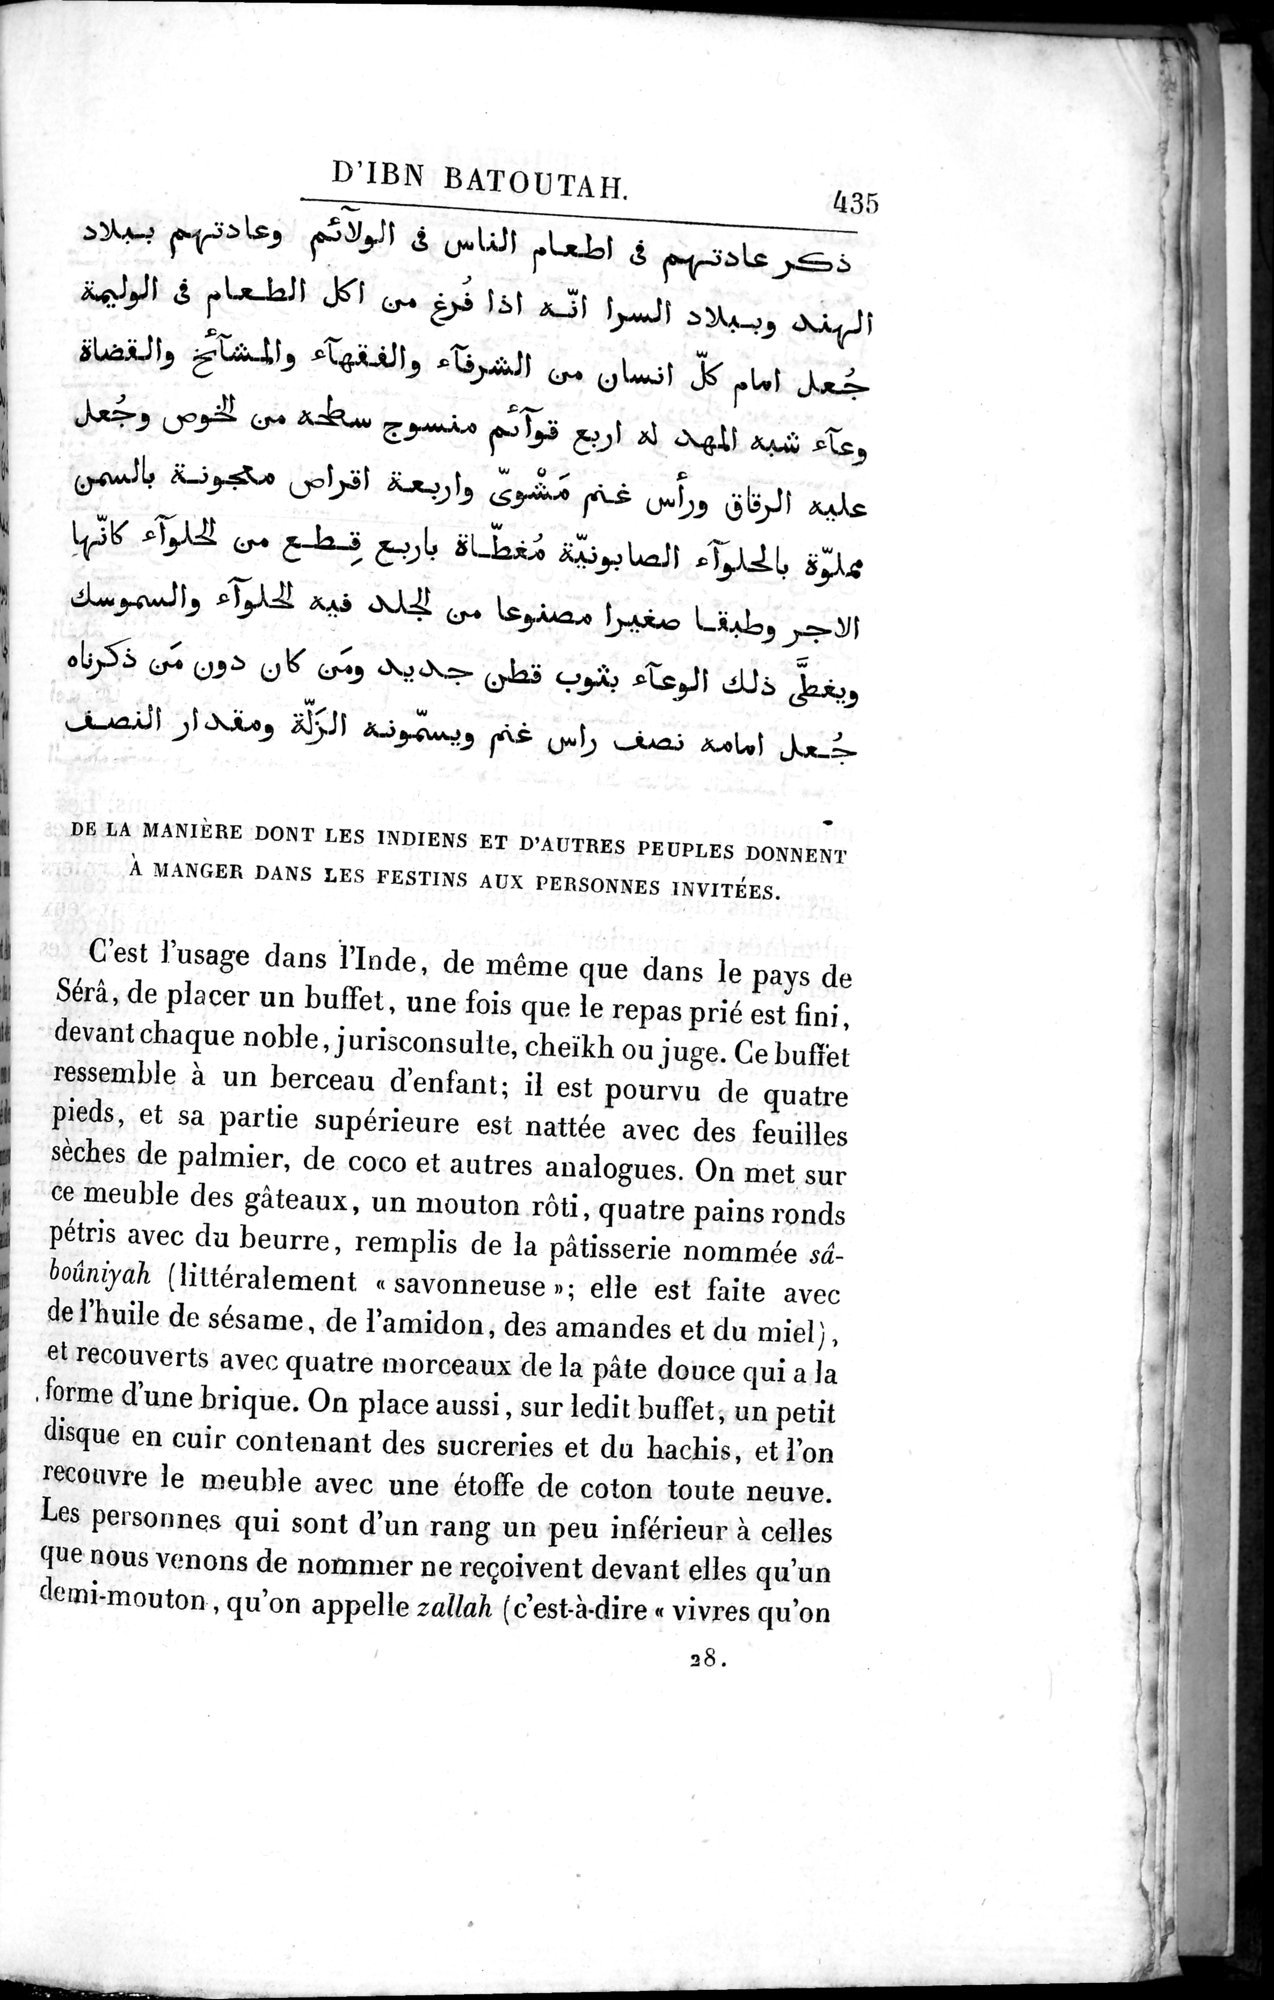 Voyages d'Ibn Batoutah : vol.3 / Page 475 (Grayscale High Resolution Image)